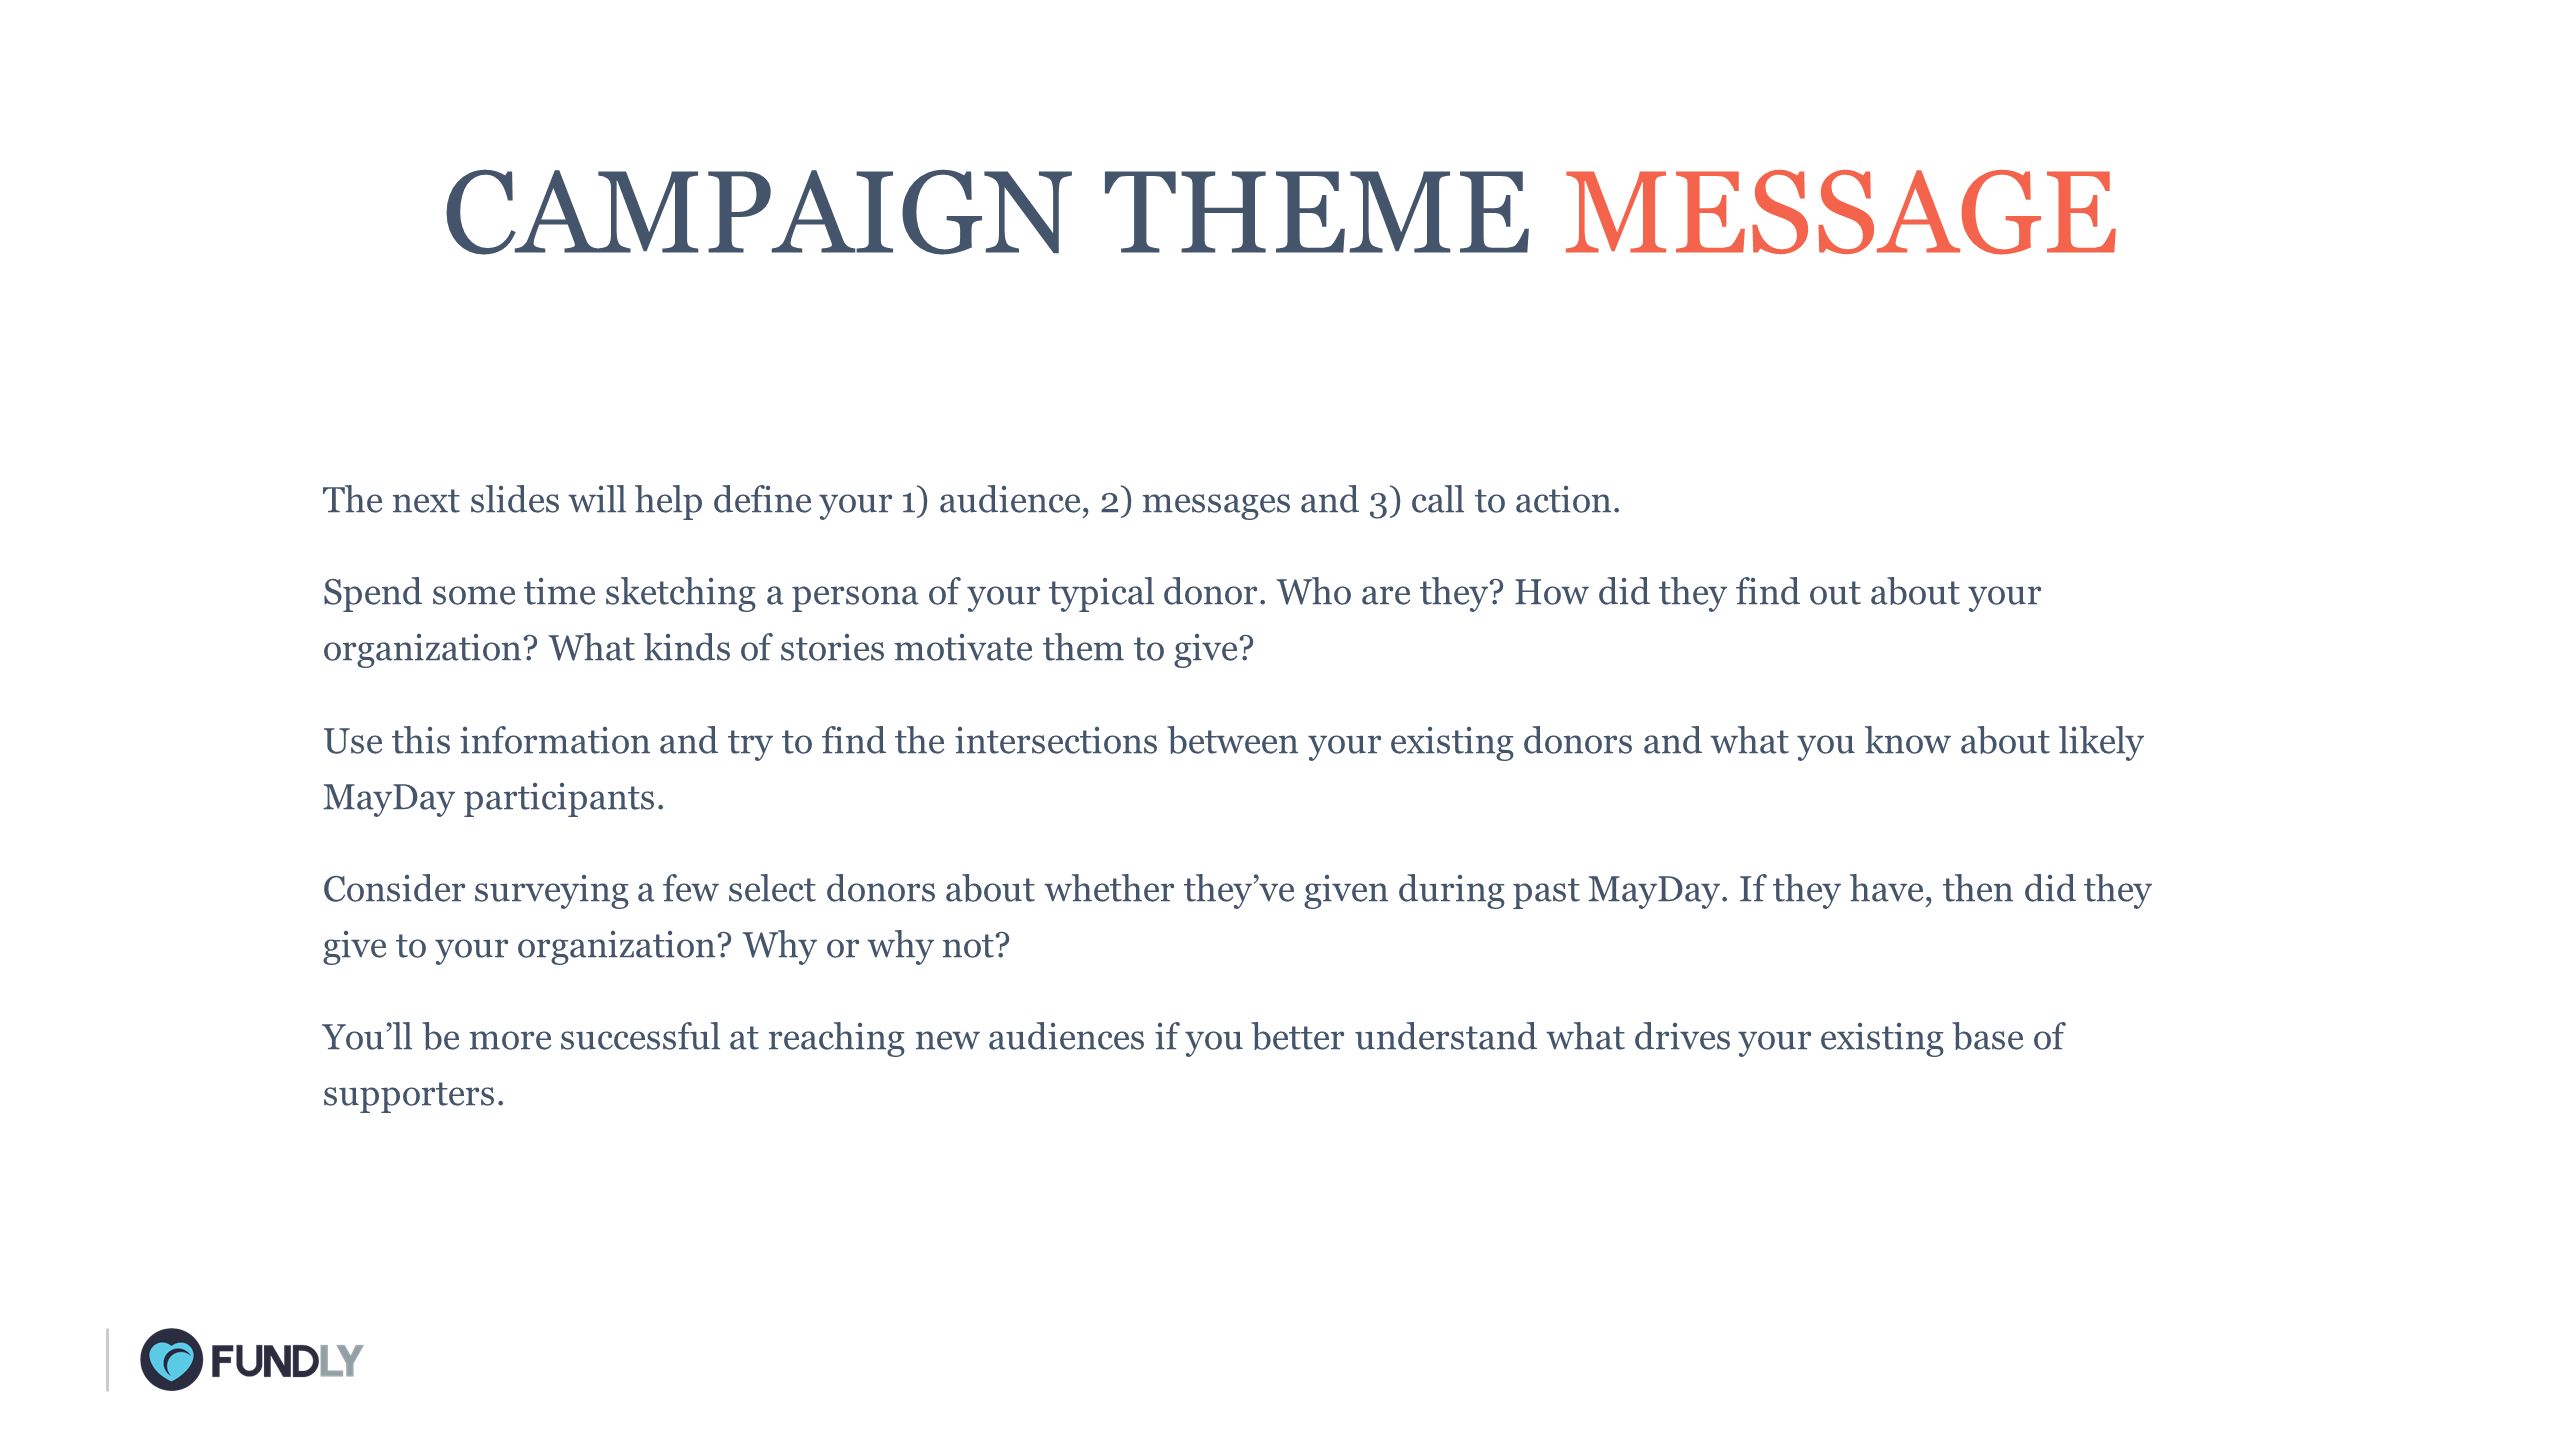 The next slides will help define your 1) audience, 2) messages and 3) call to action.